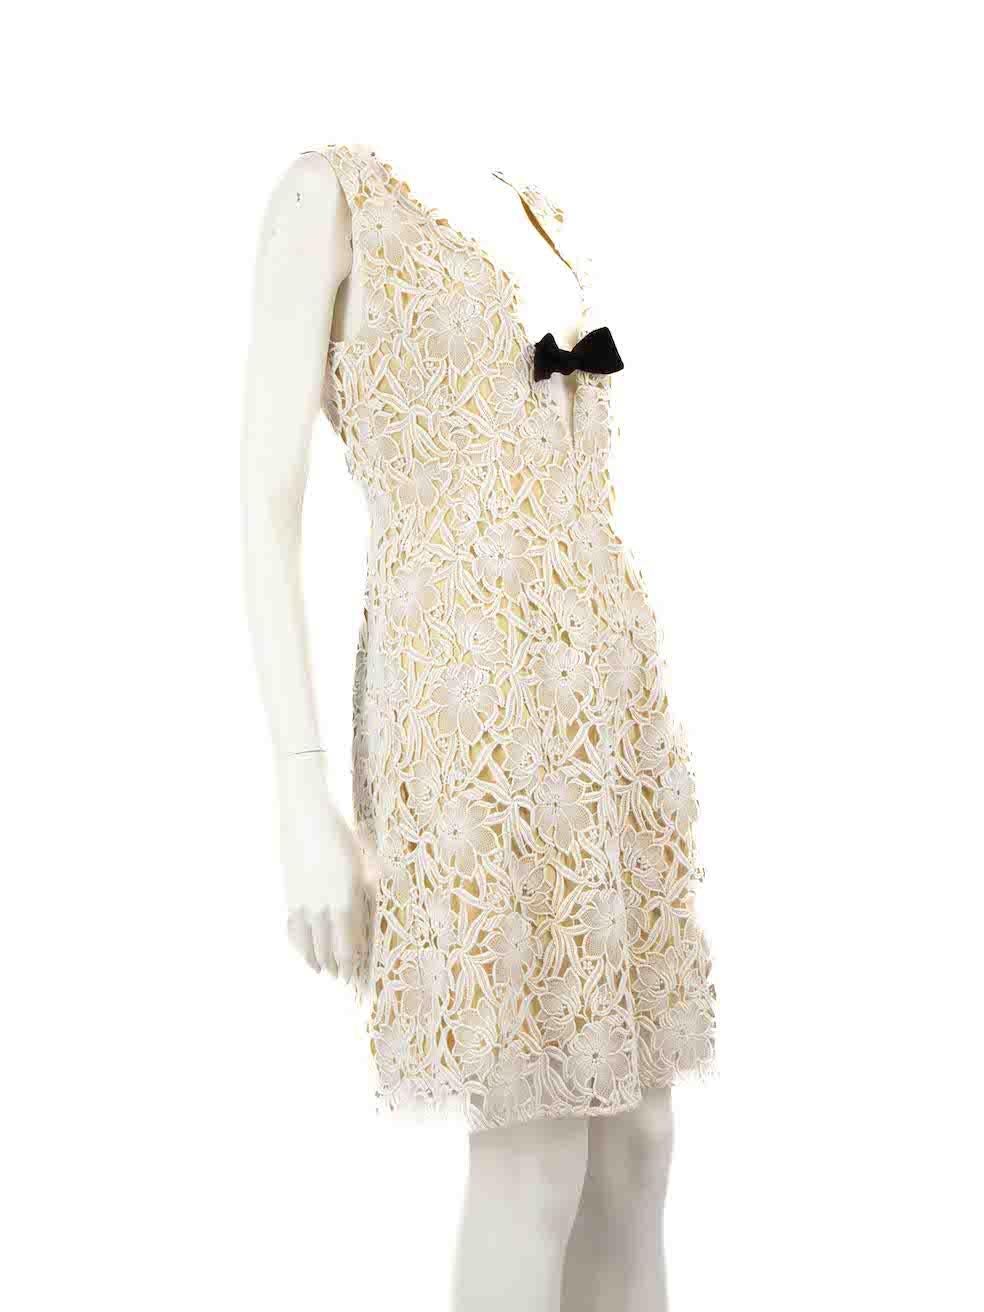 CONDITION is Very good. Minimal wear to the dress is evident. Minimal wear to the front, centre and above the hemline is seen with discolouration marks on this used Burberry designer resale item.
 
 
 
 Details
 
 
 White
 
 Lace
 
 Dress
 
 Floral